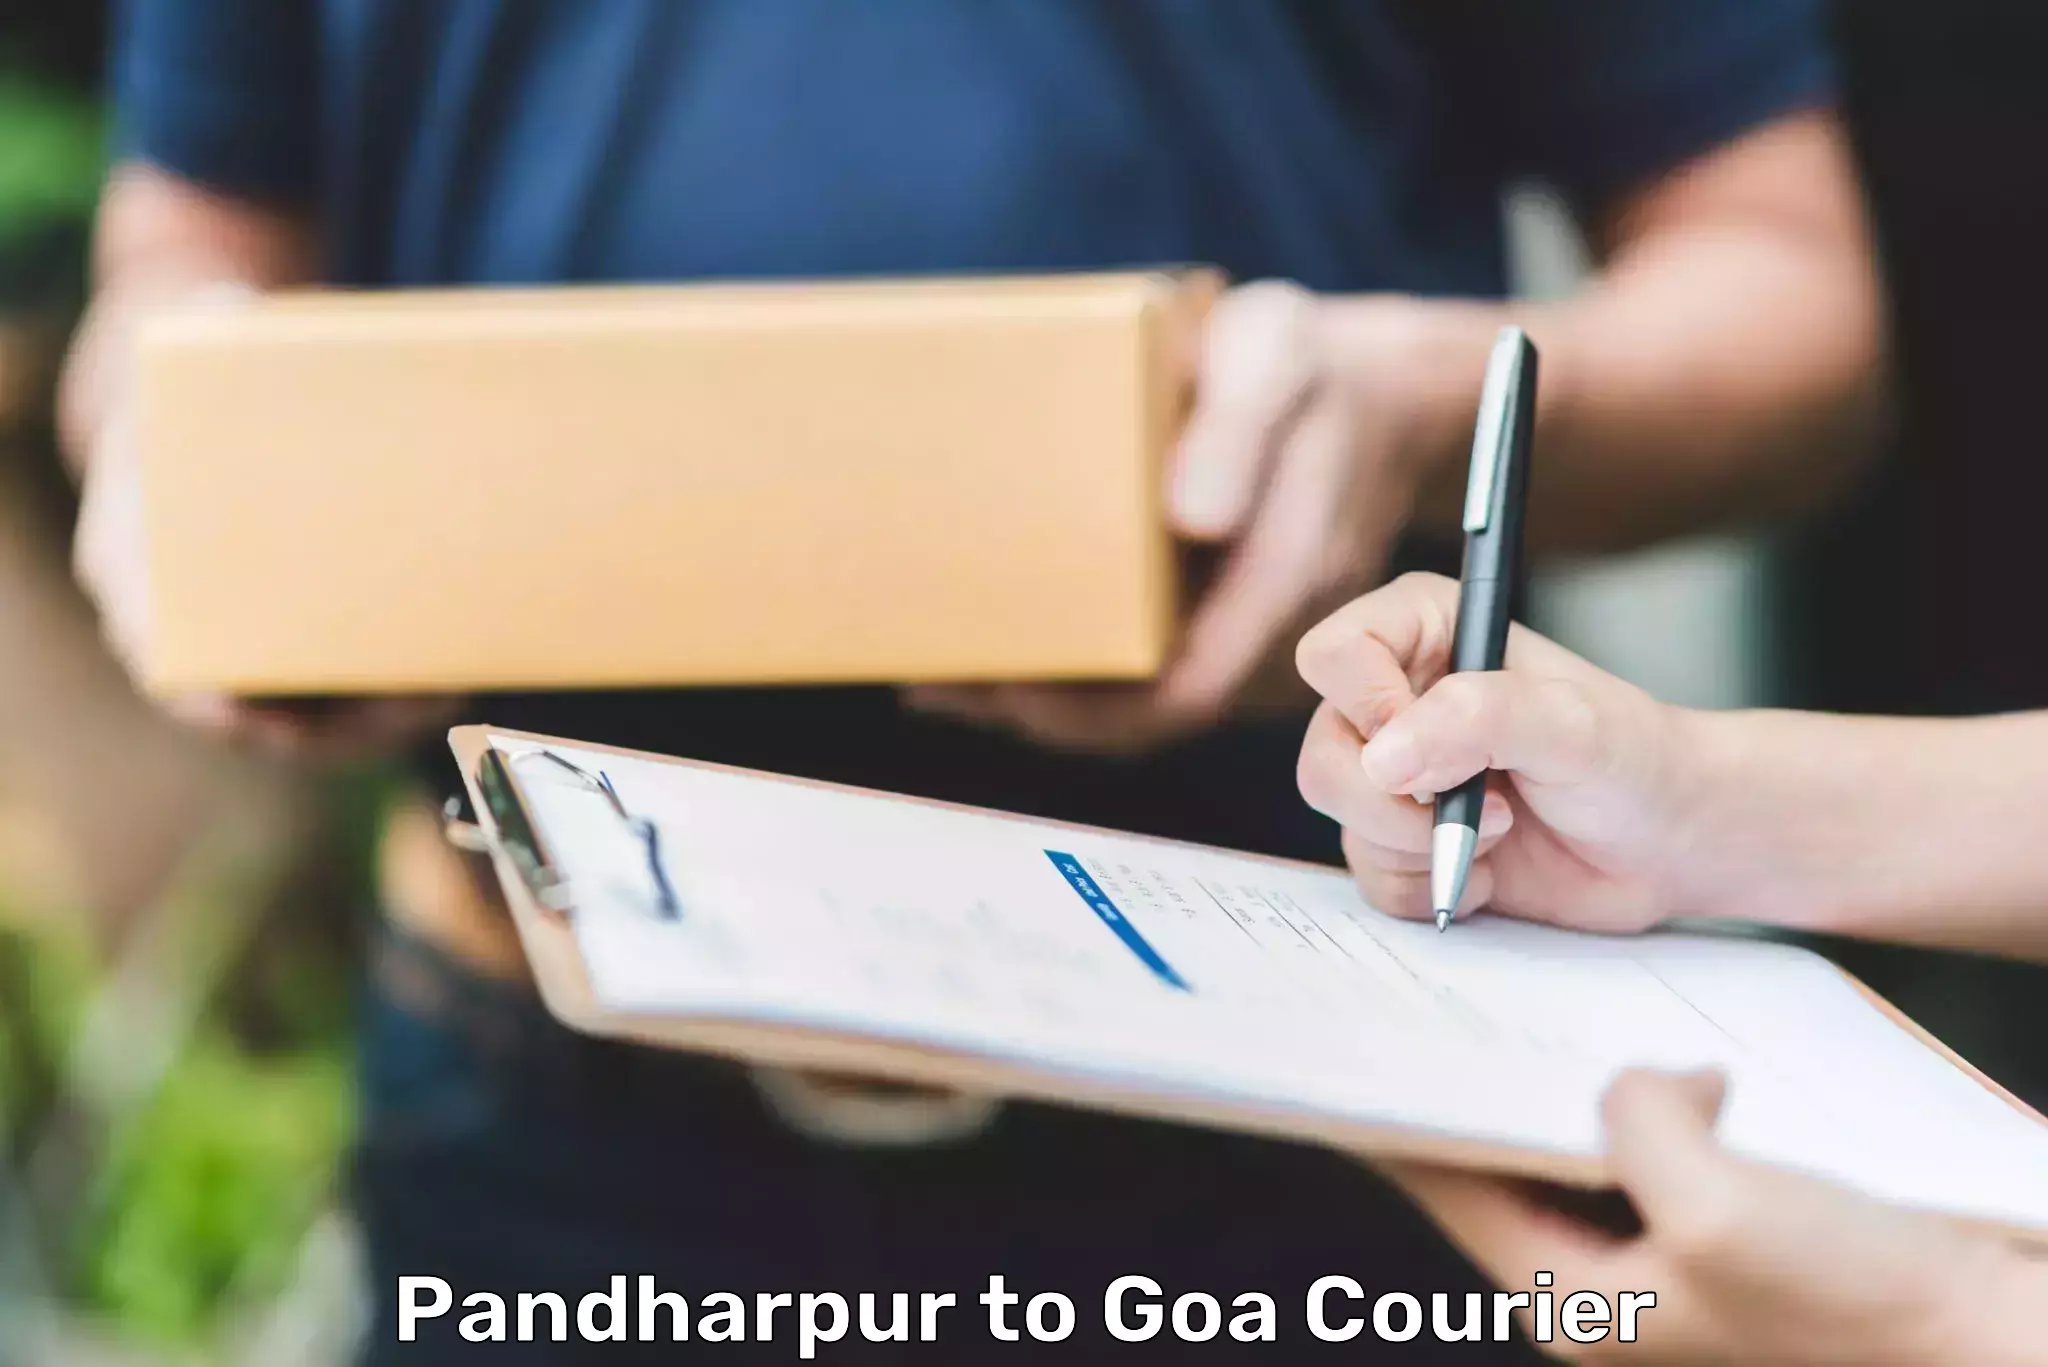 Express delivery capabilities Pandharpur to Goa